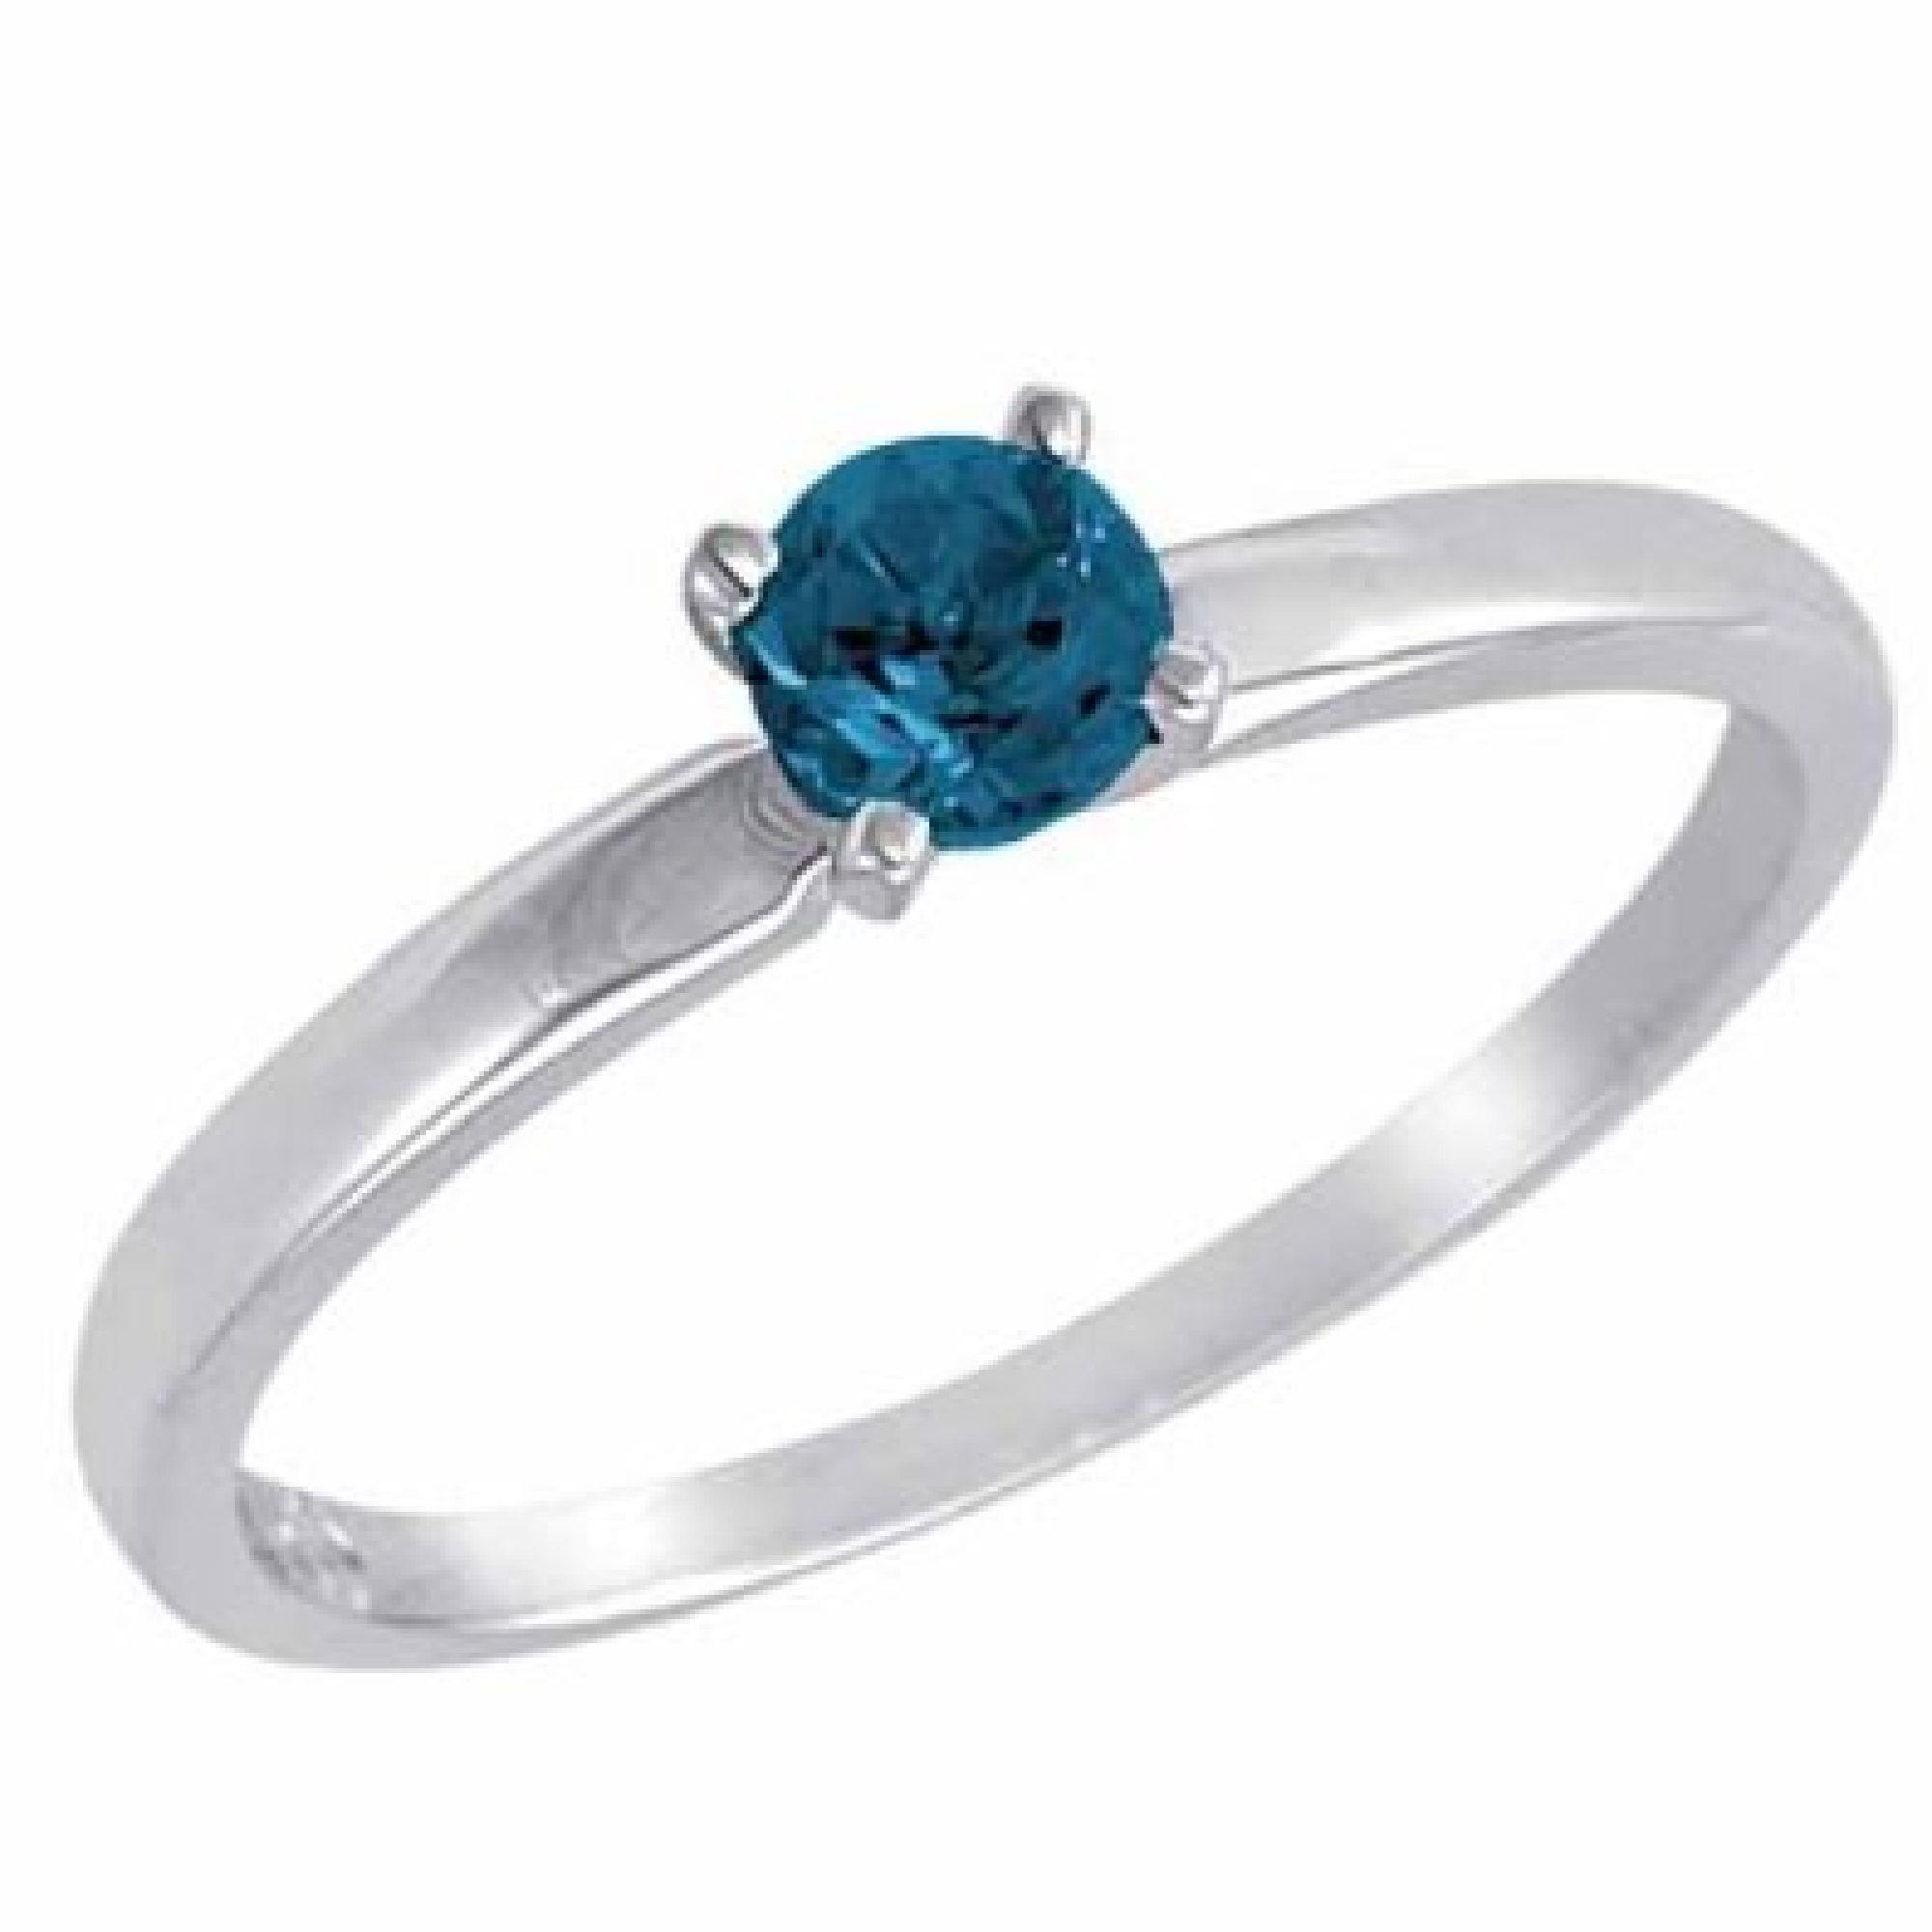 14K White Gold and 0.85 Carat Blue Genuine Diamond Solitaire Ring ( G J, SI1 SI2 ) Very Rare Color Diamond Designed in France by Paris Jewelry